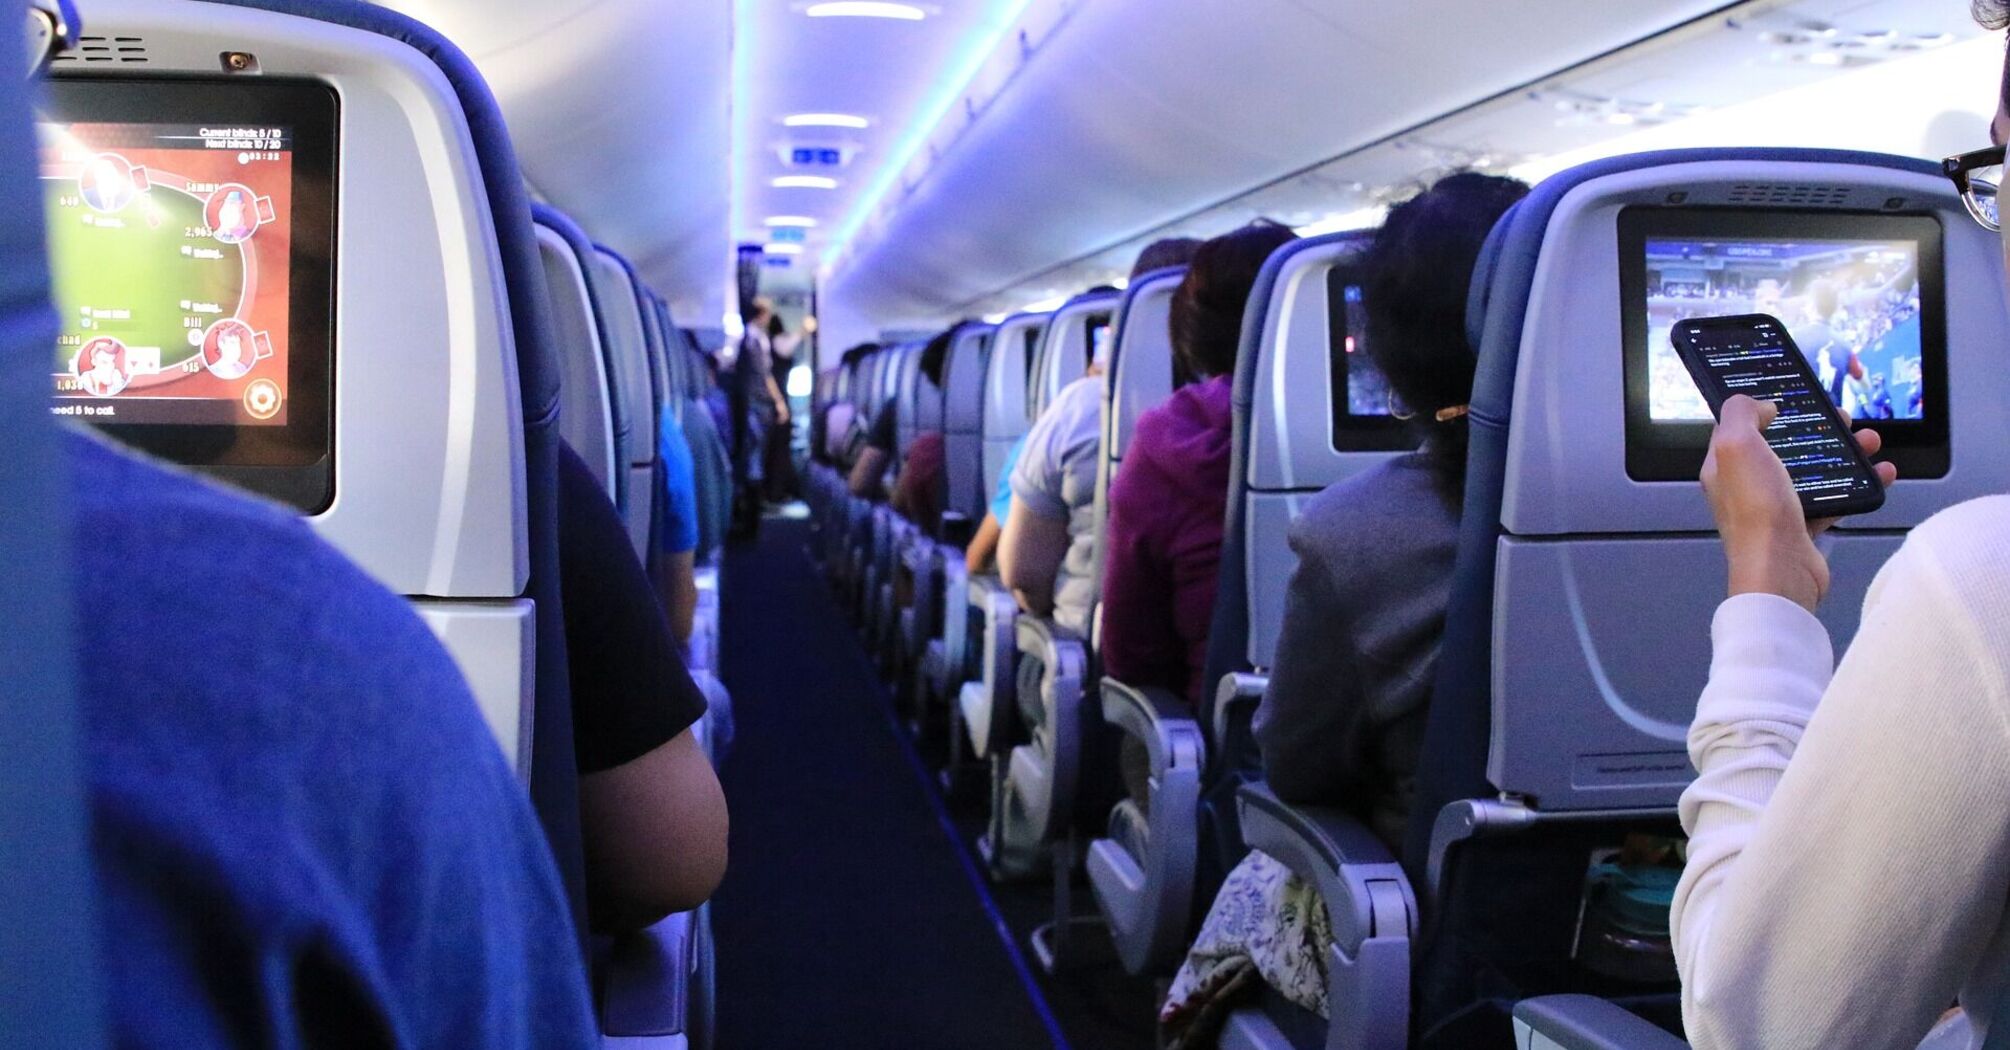 Passengers seated in an airplane cabin